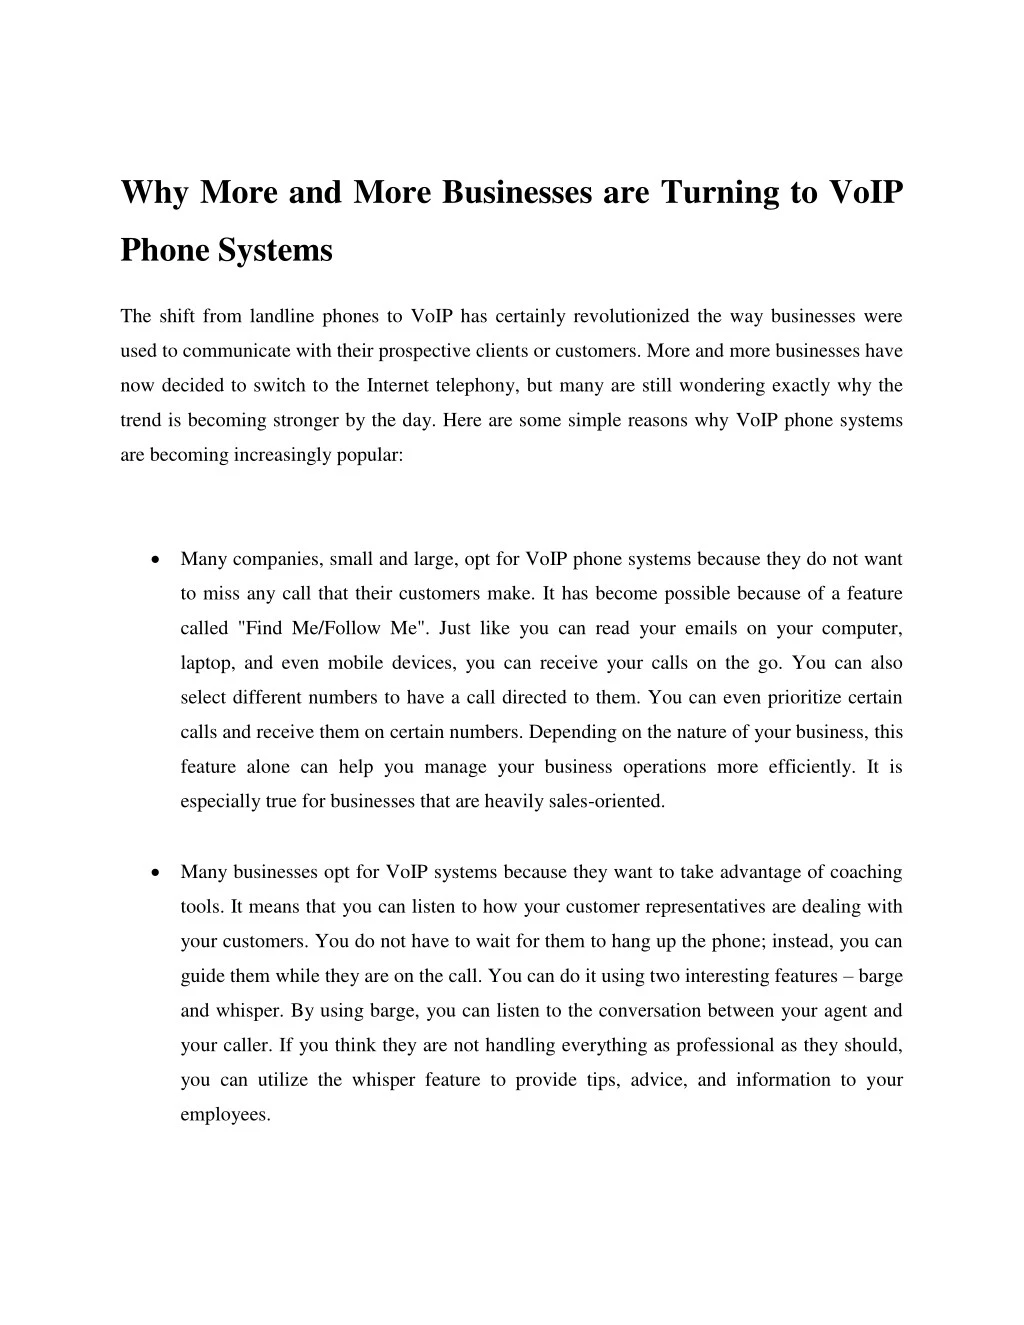 why more and more businesses are turning to voip